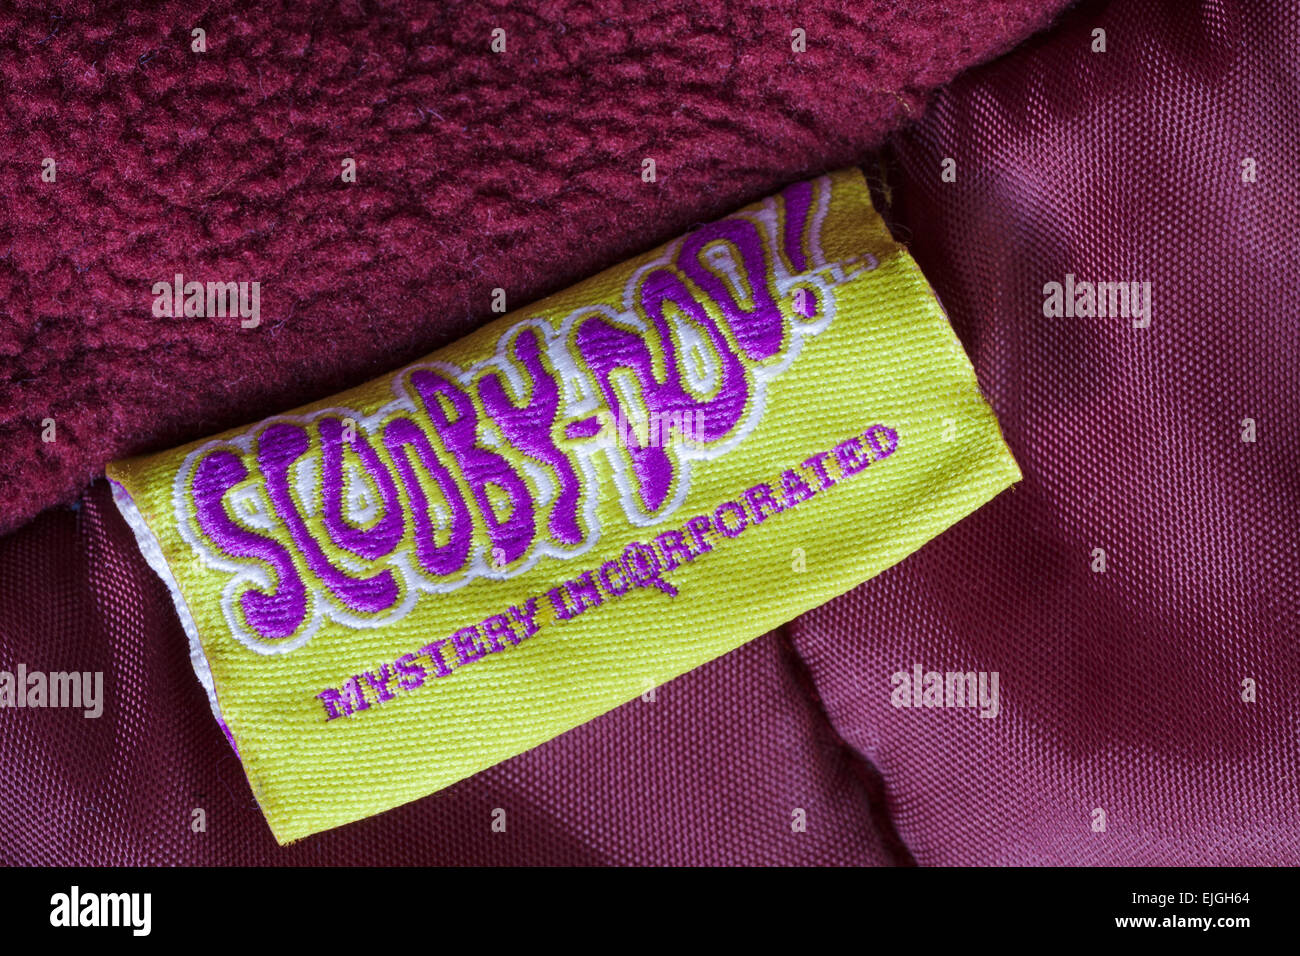 Scooby-Doo Mystery Incorporated Label in junge Mädchen Mantel Stockfoto